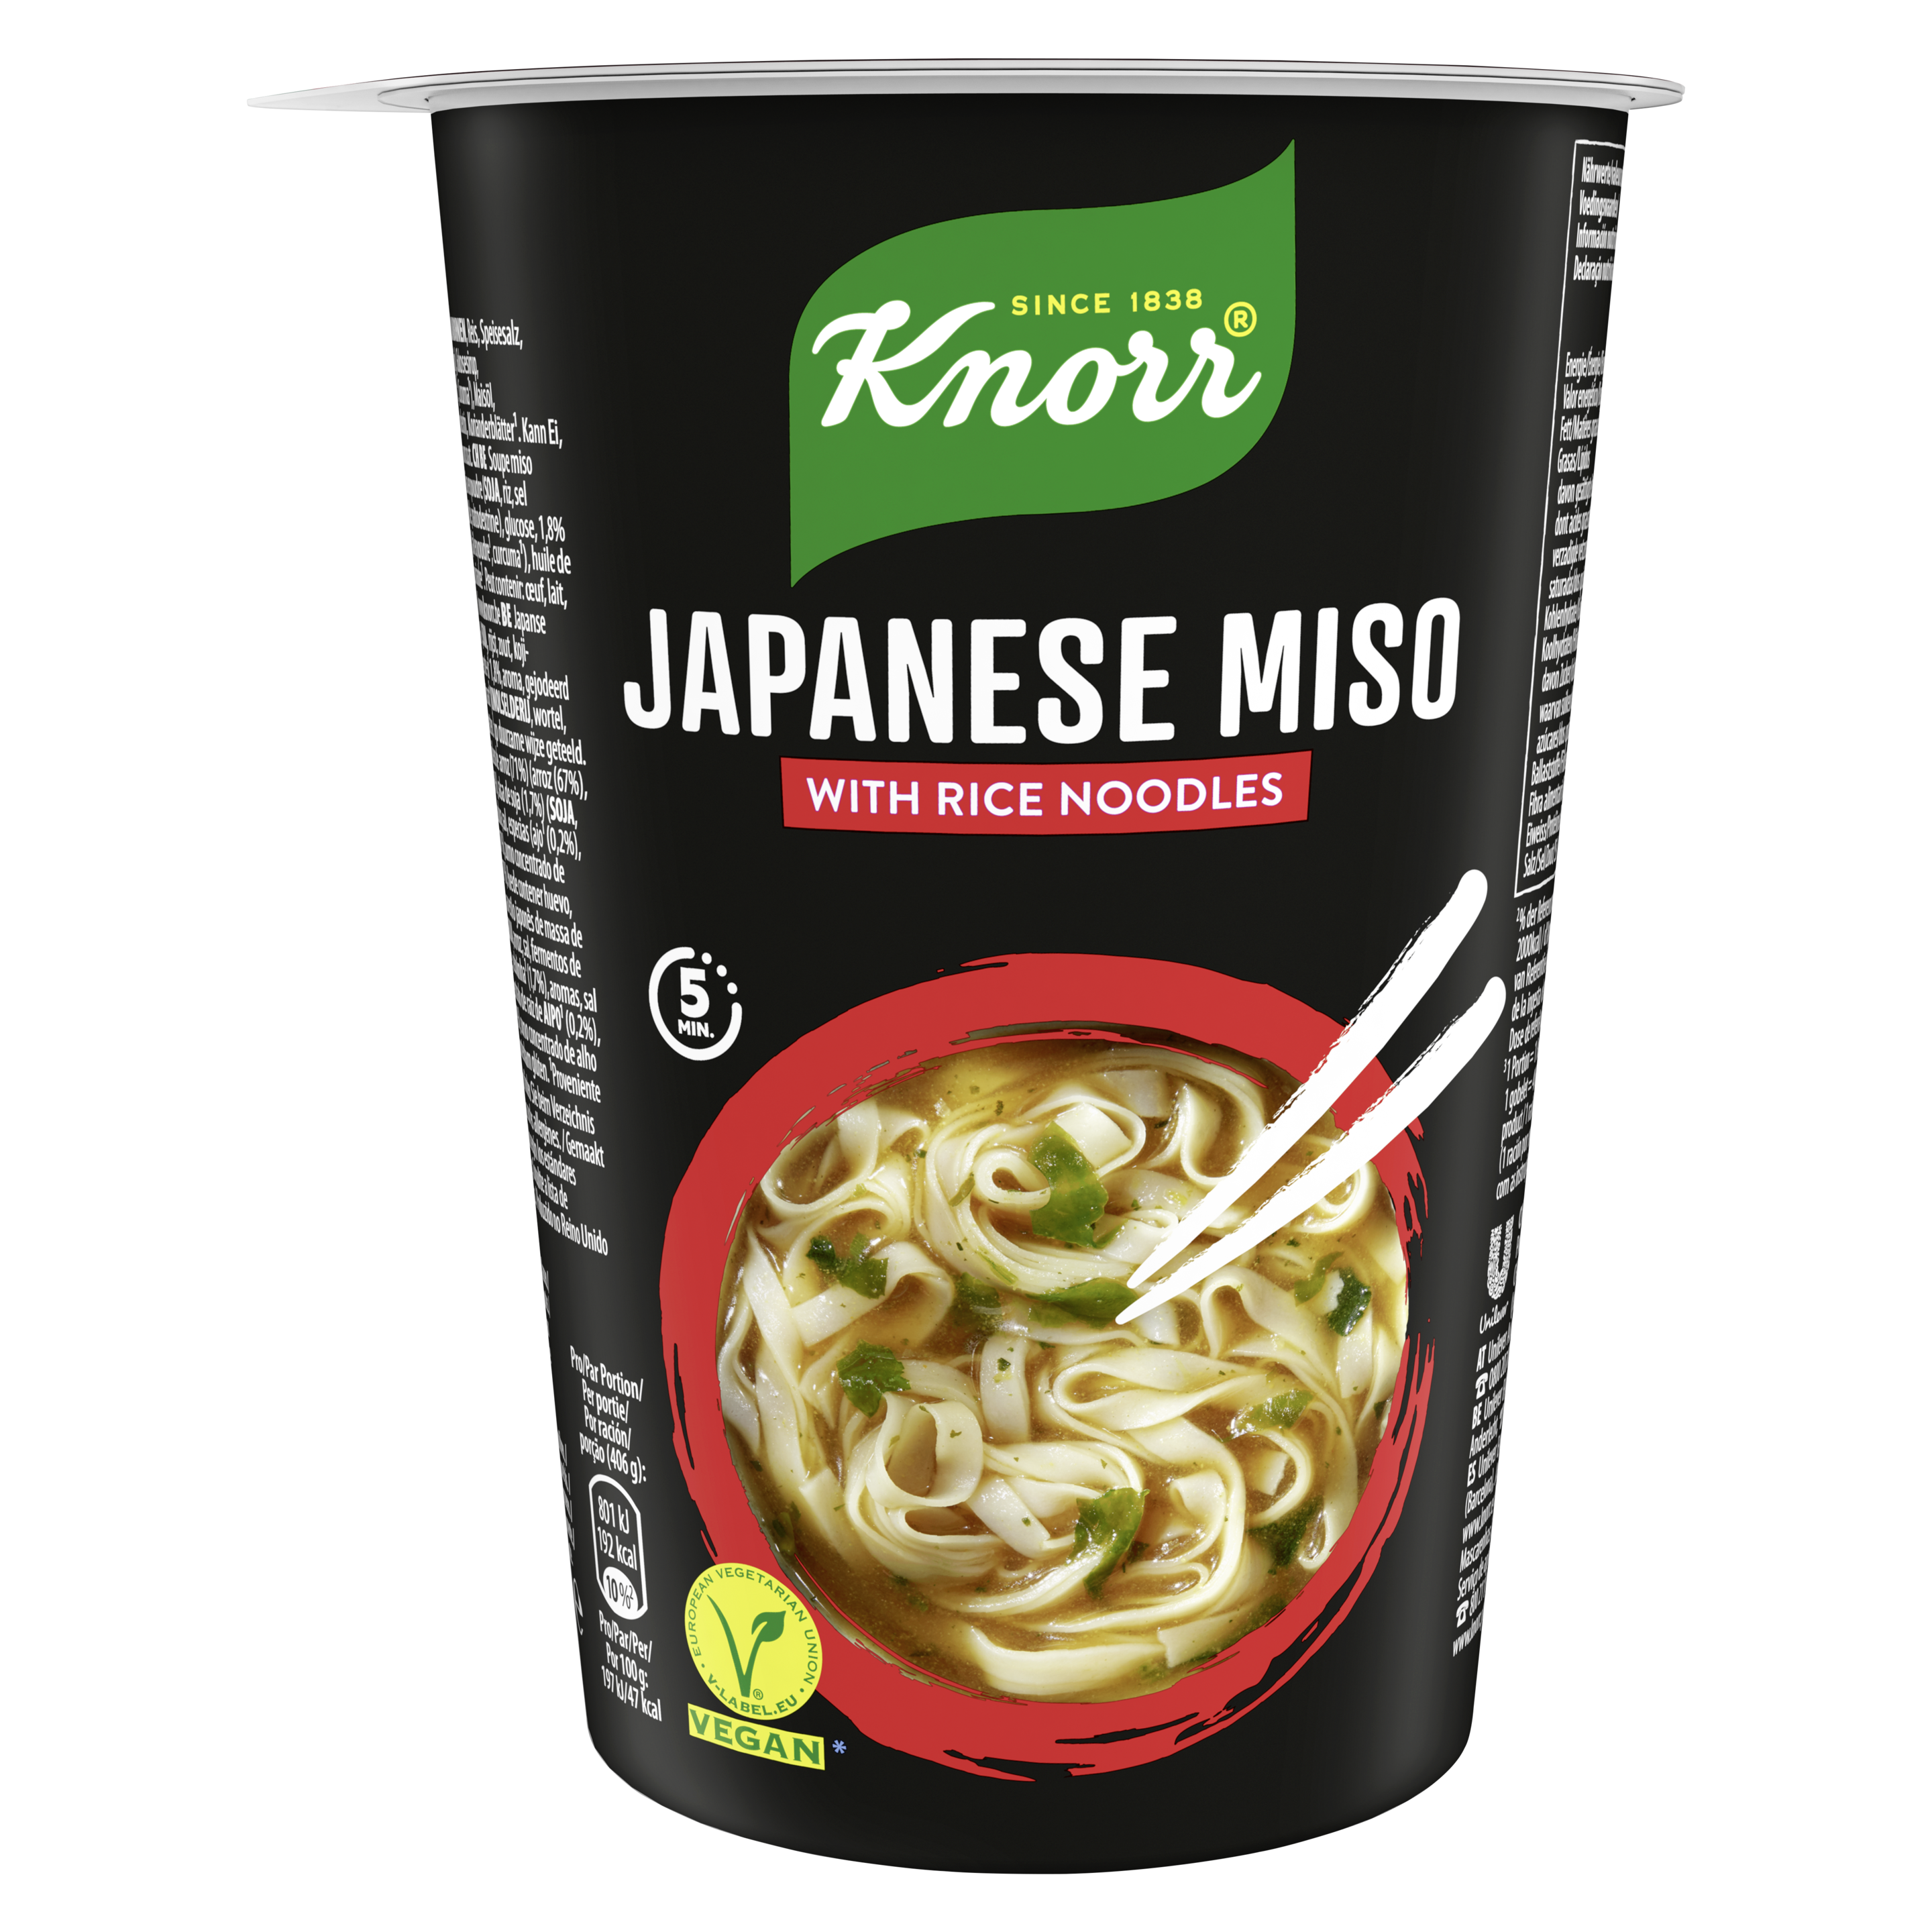 KNORR Japanese miso with rice noodles gobelet 1 portion